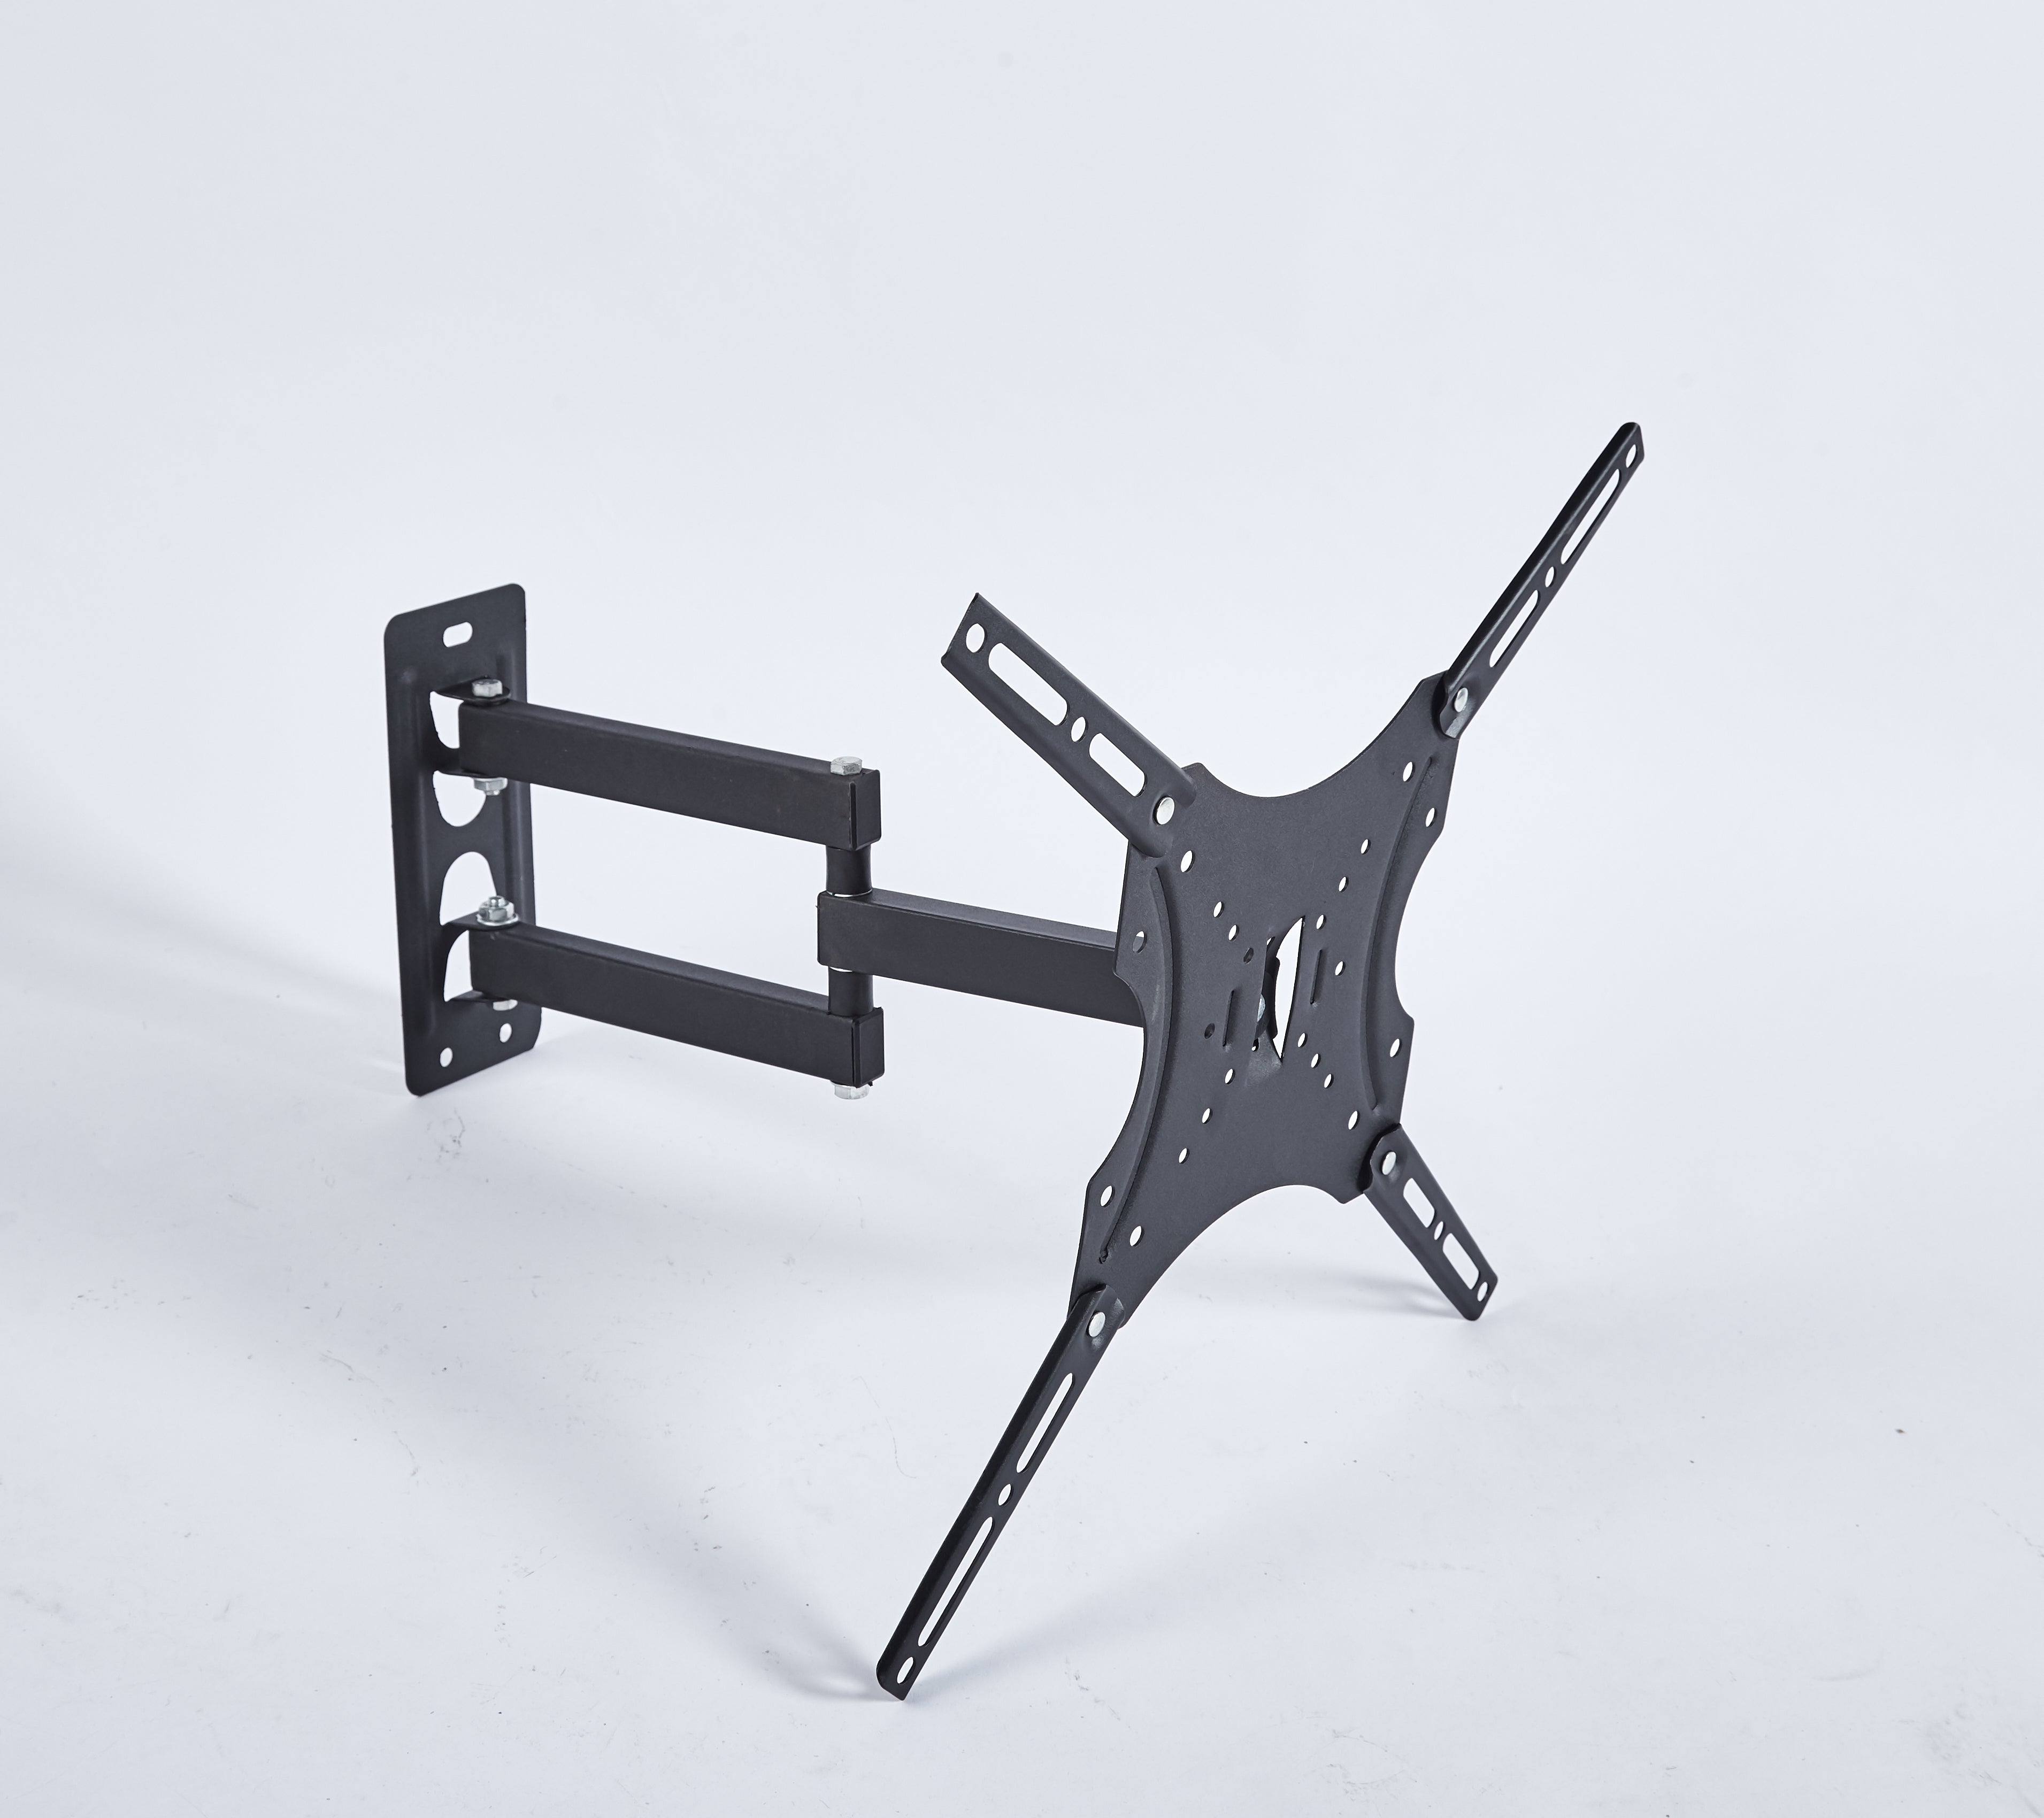 Full Motion Wall Mount Bracket for 32 inch to 55 inch TVs TV-014